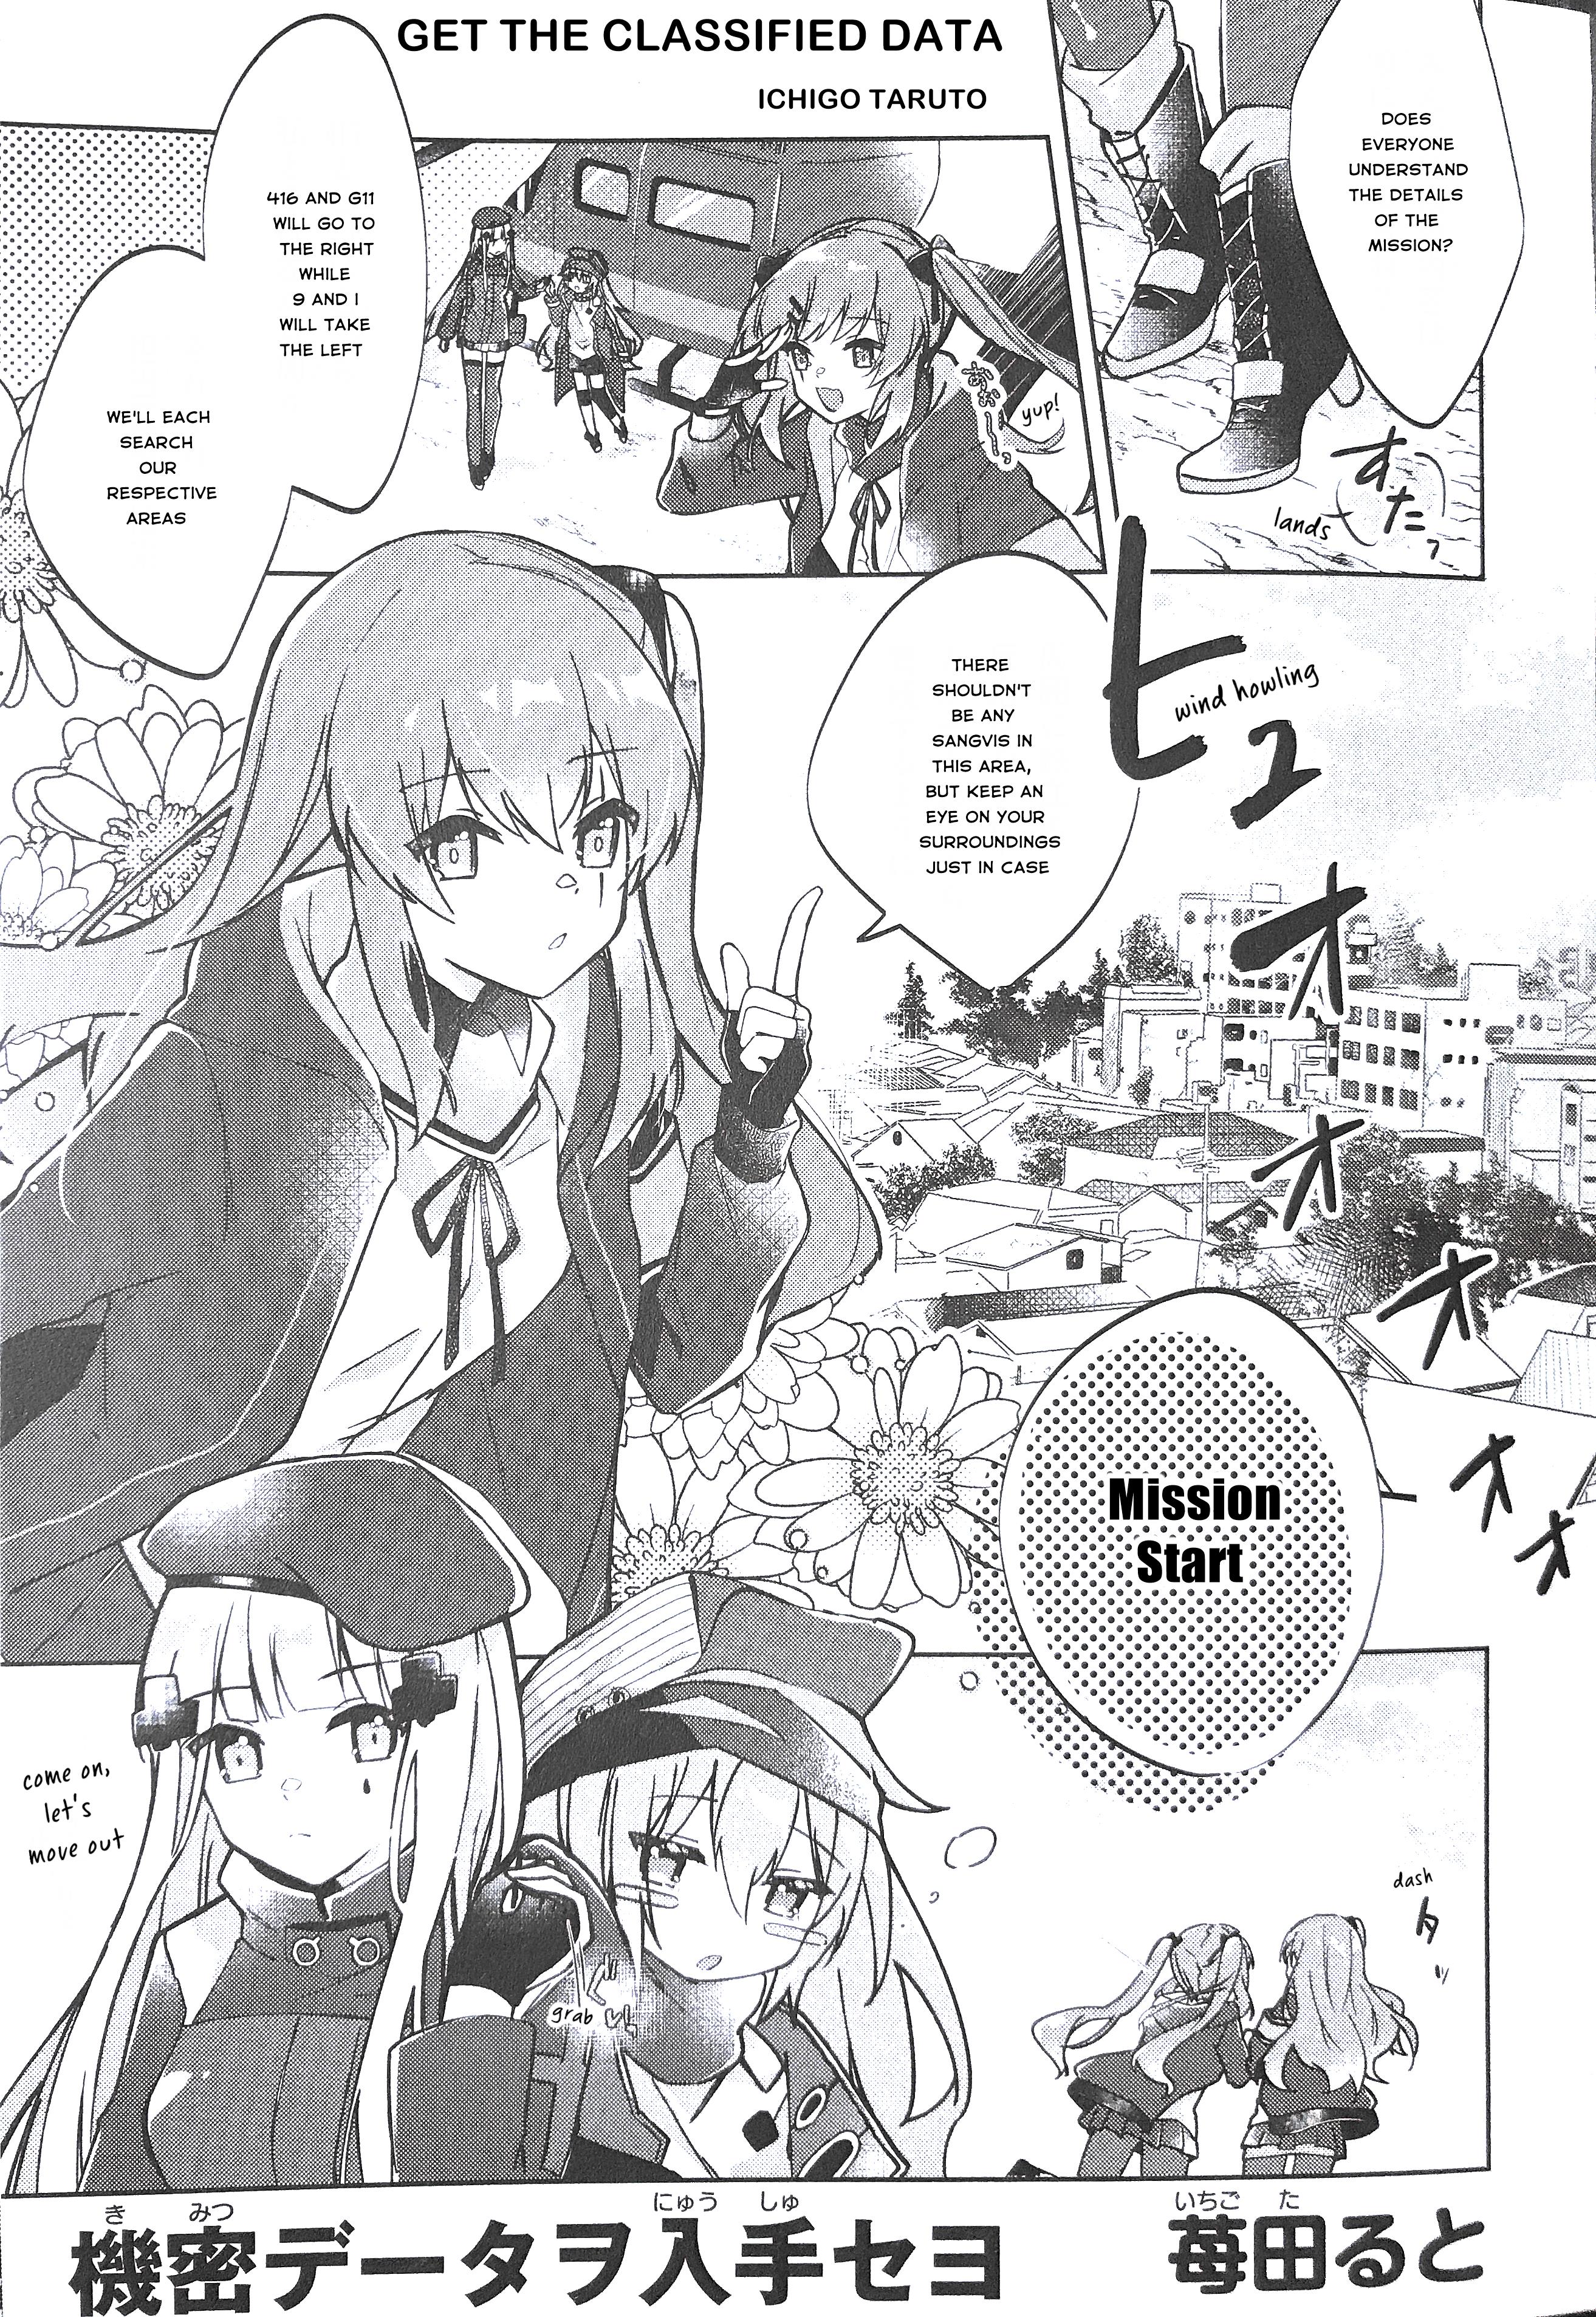 Dolls Frontline Comic Anthology - DNA Media 2019 - Chapter 32644 - Get the Classified Data! - Image 1